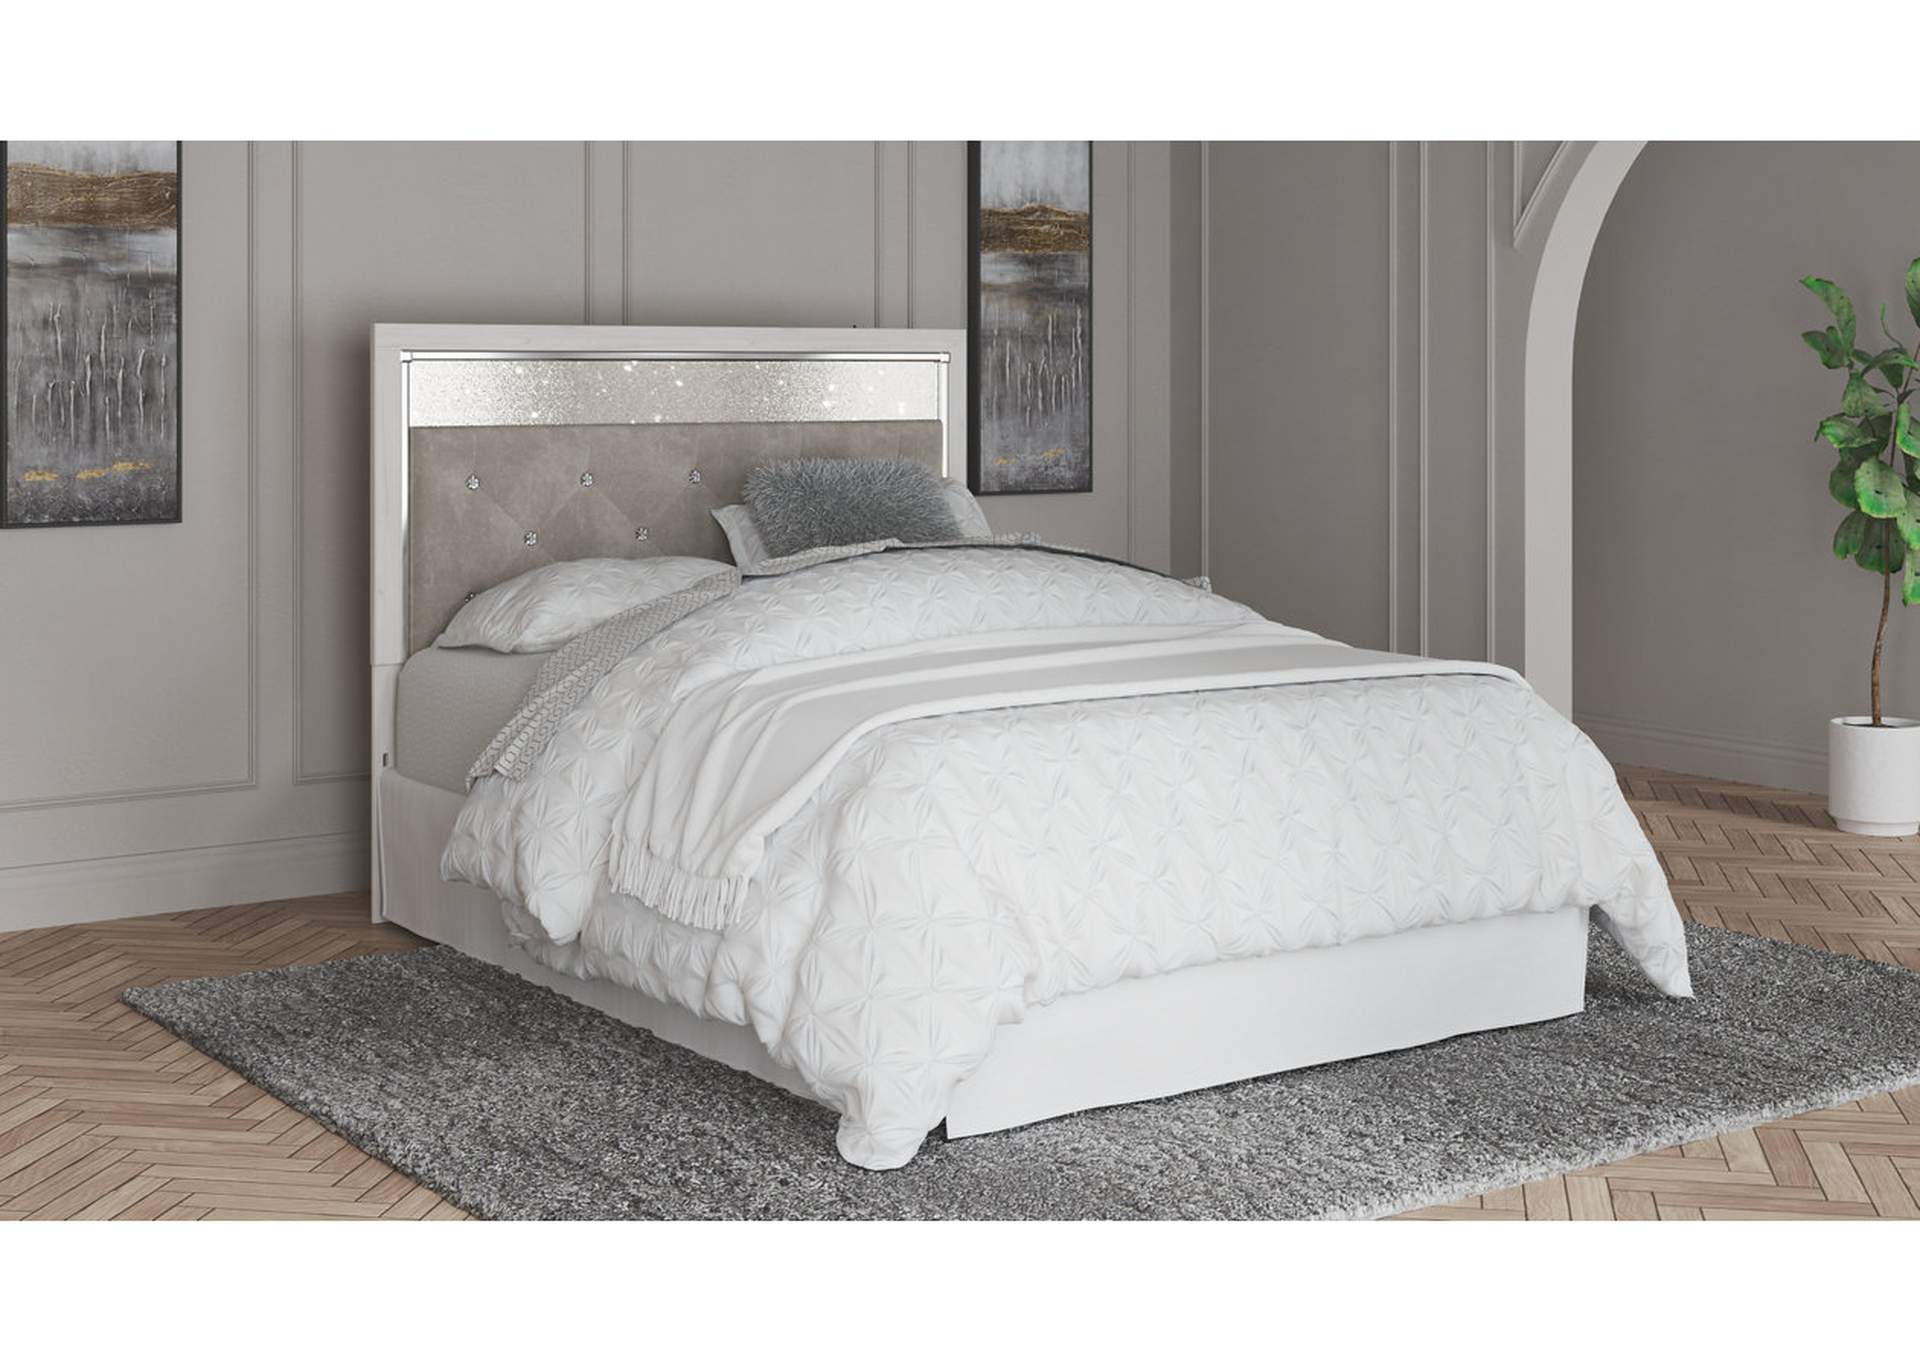 Altyra Queen Upholstered Panel Headboard,Signature Design By Ashley